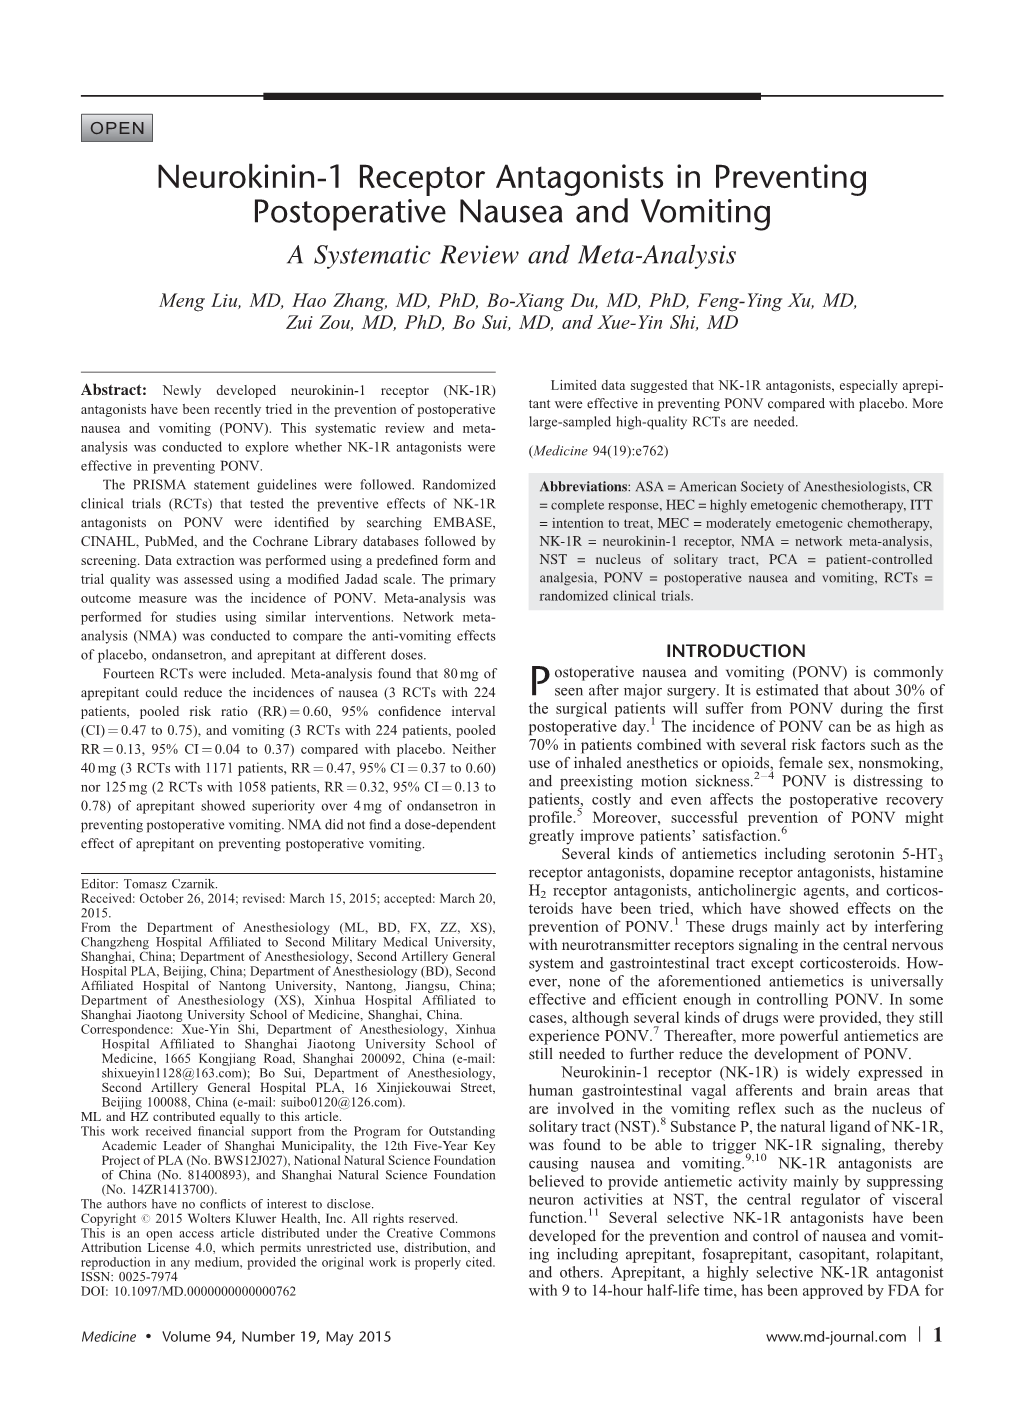 Neurokinin-1 Receptor Antagonists in Preventing Postoperative Nausea and Vomiting a Systematic Review and Meta-Analysis